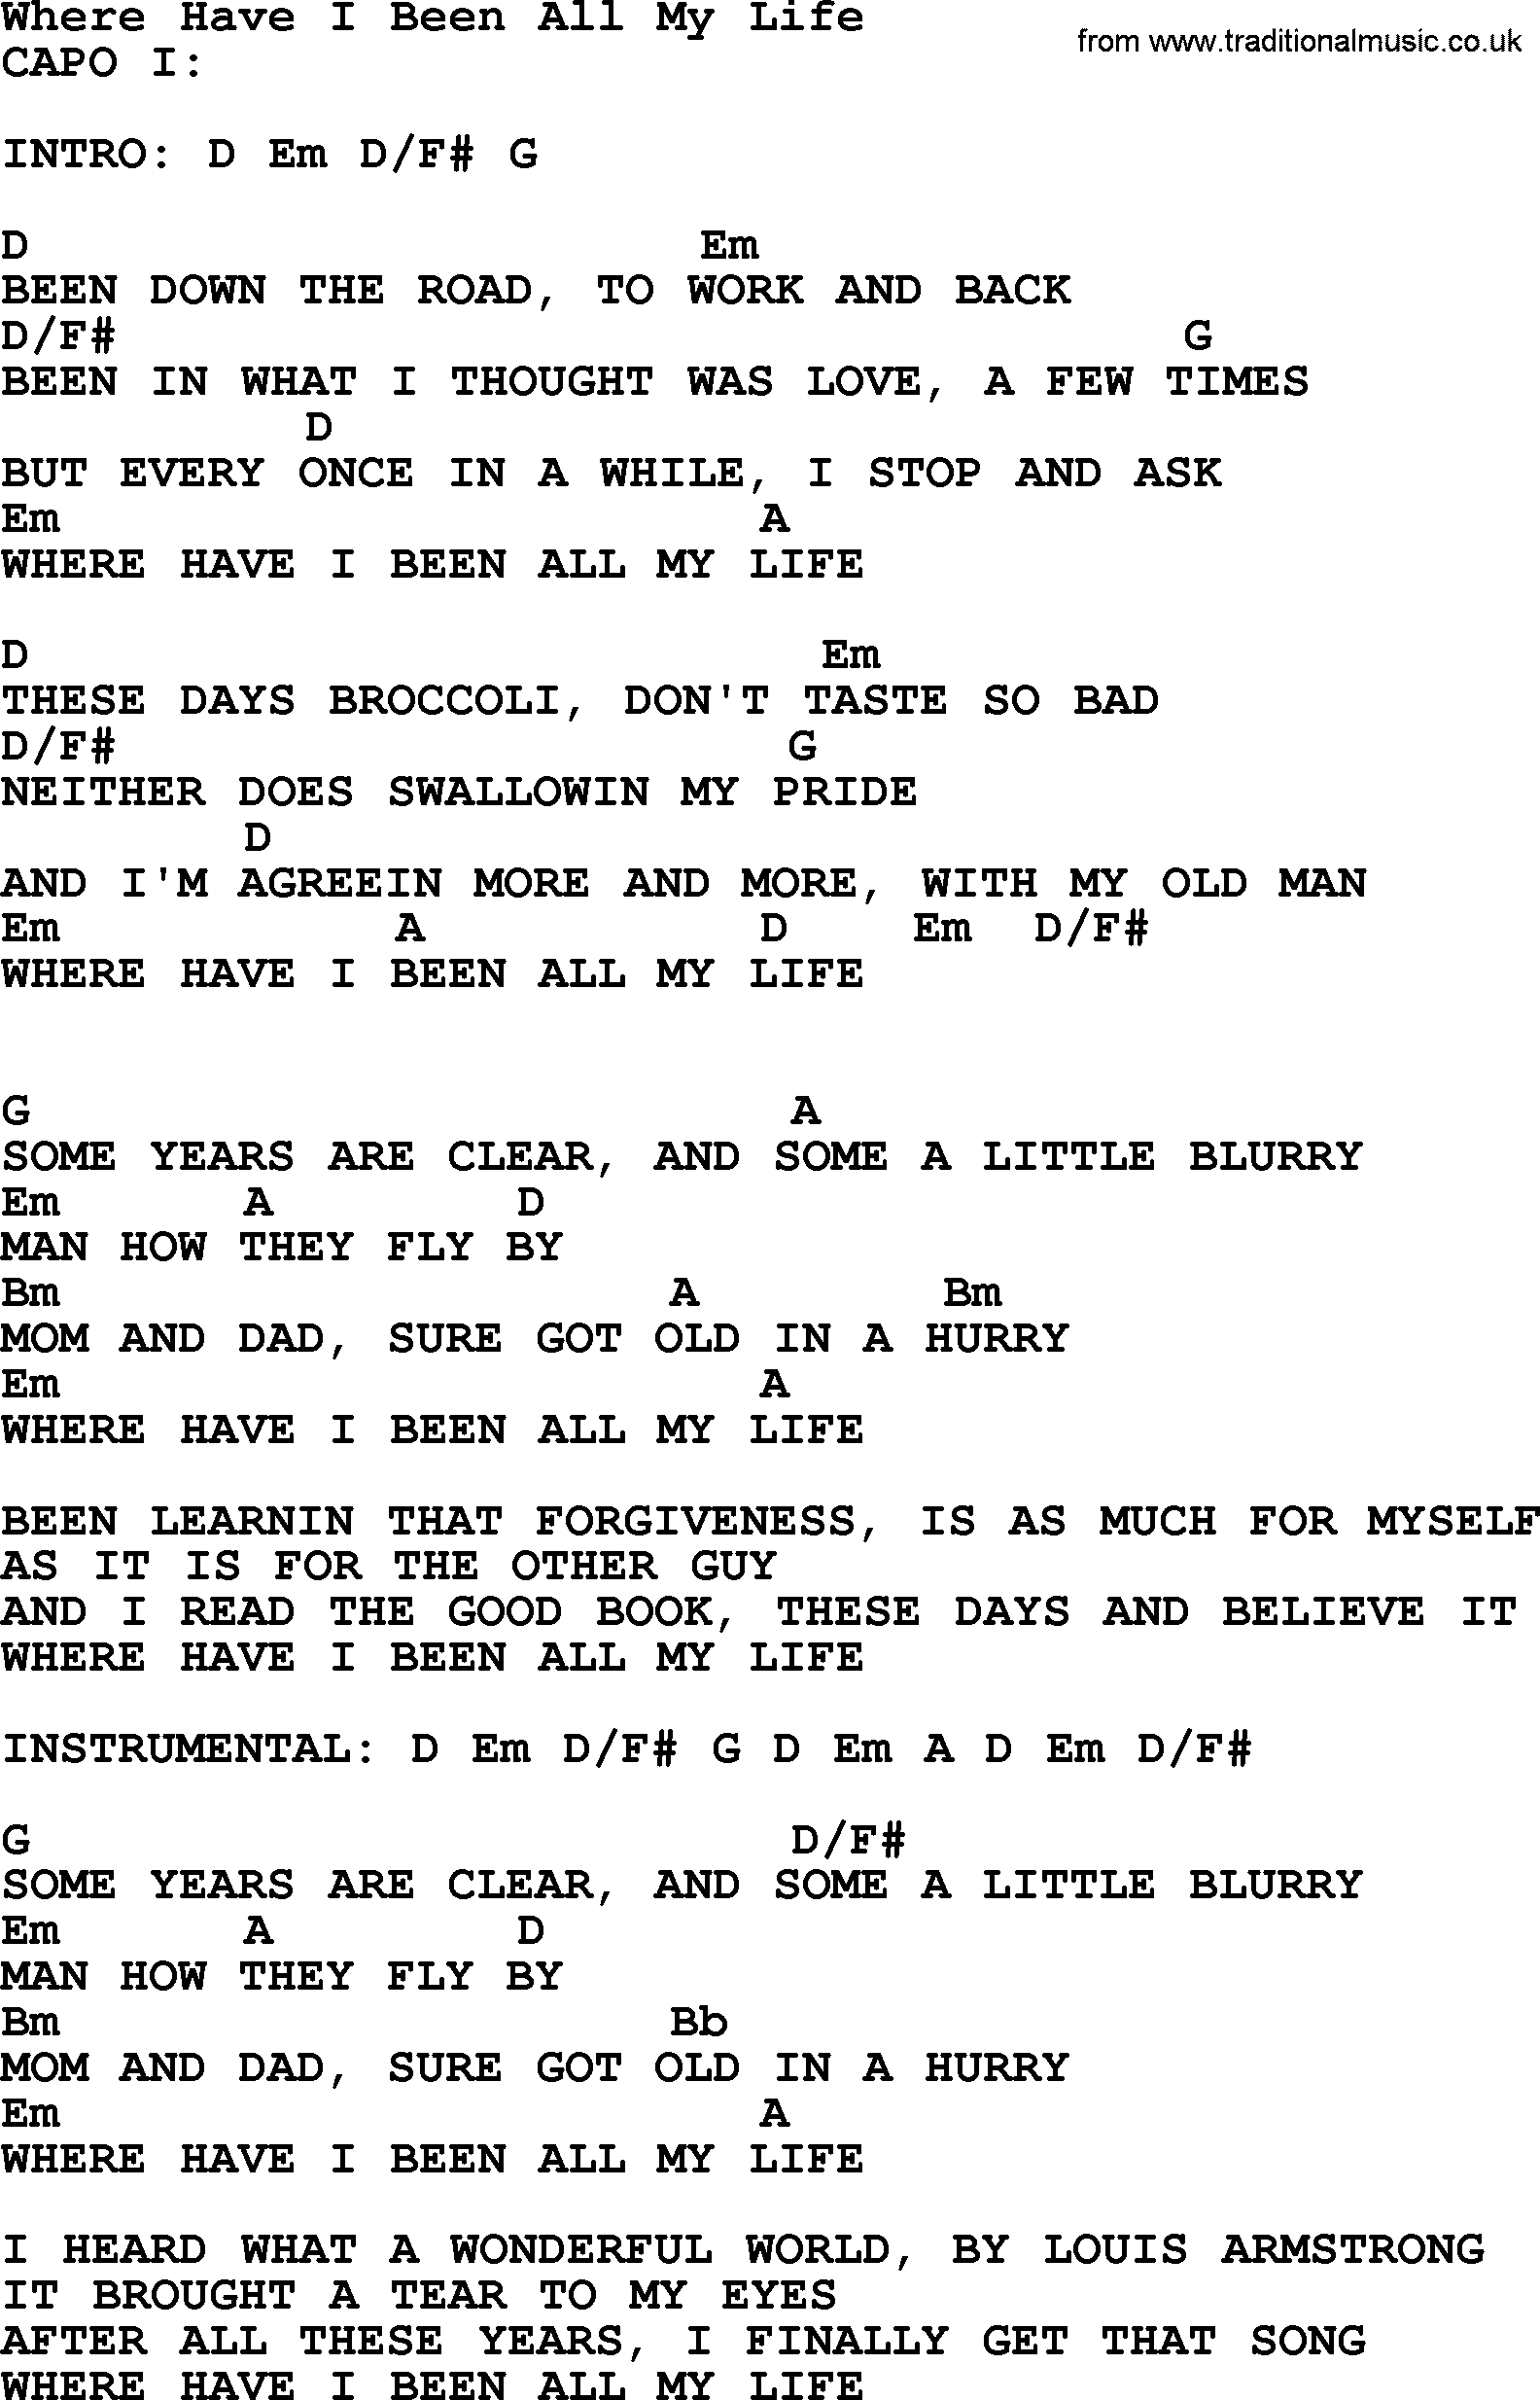 George Strait song: Where Have I Been All My Life, lyrics and chords